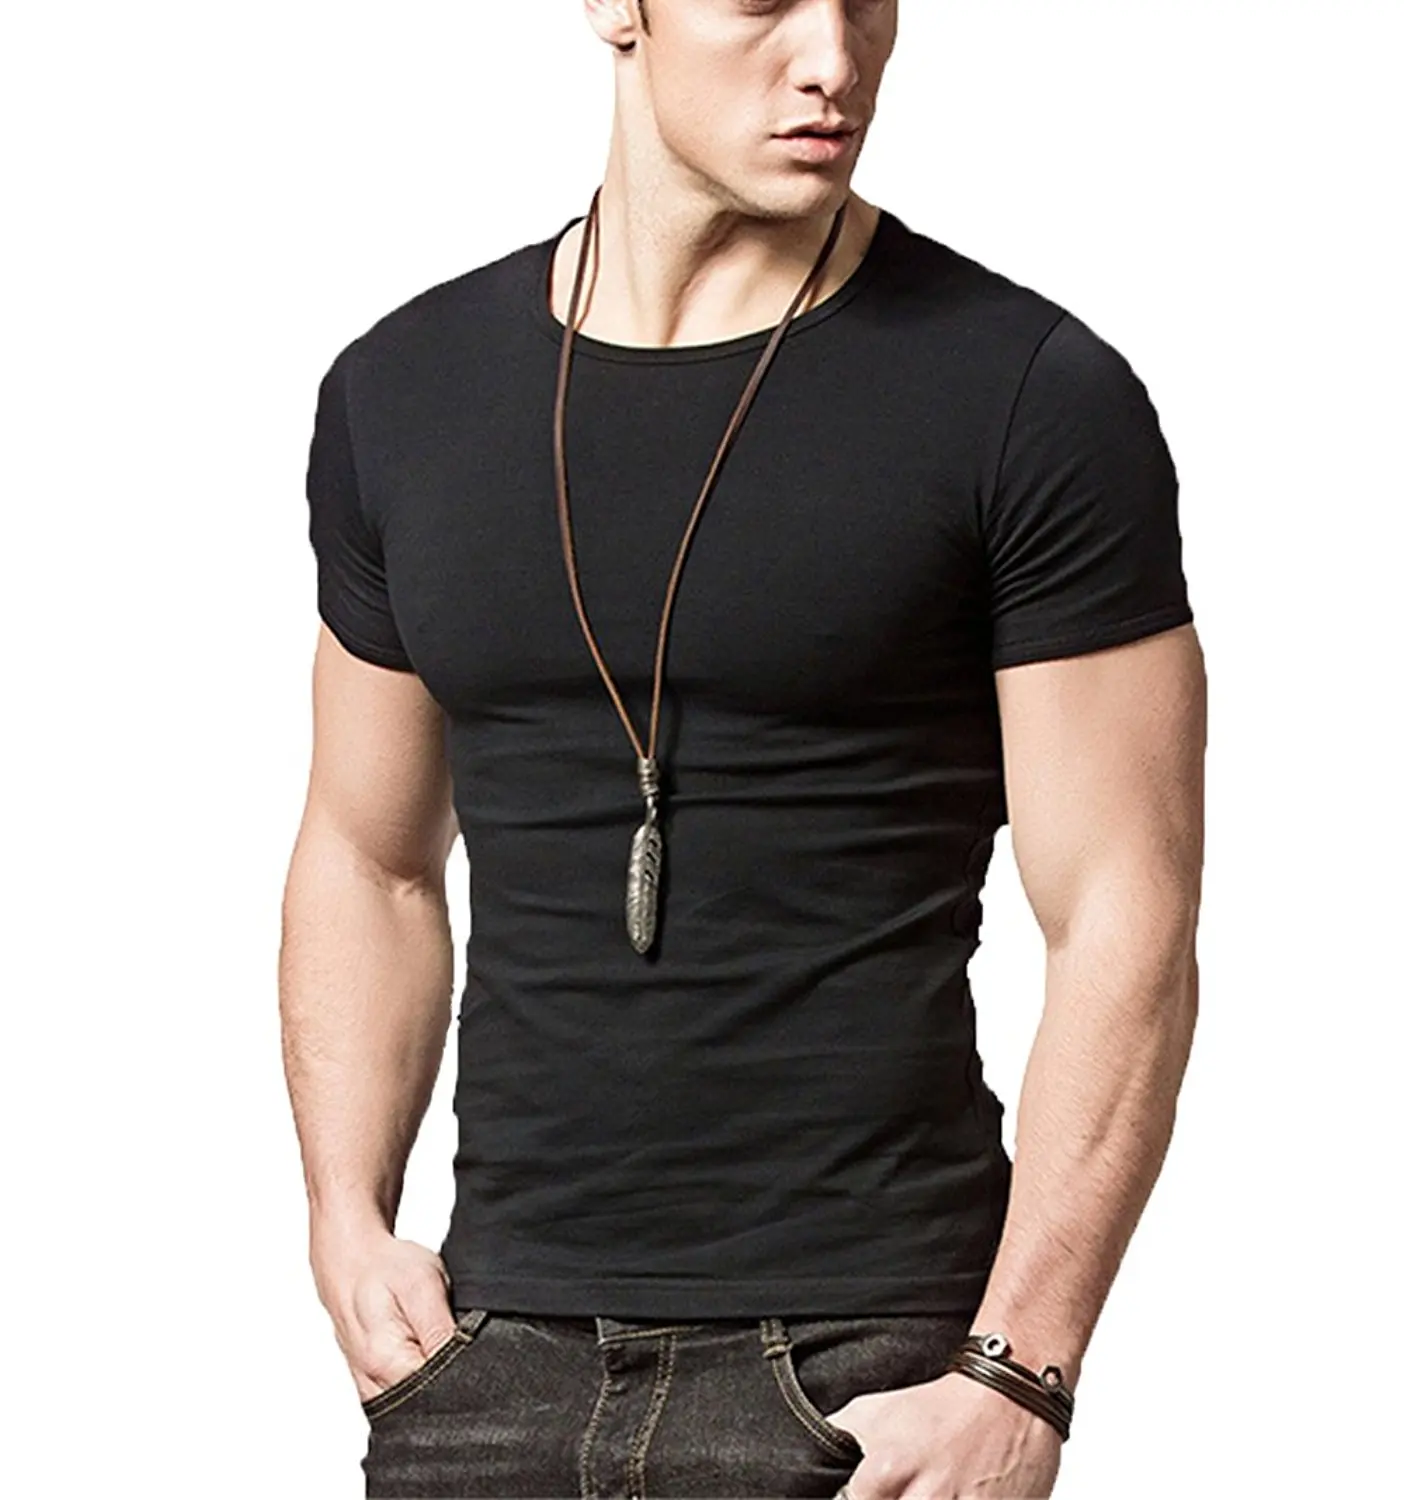 Cheap Muscle T Shirts, find Muscle T Shirts deals on line at Alibaba.com